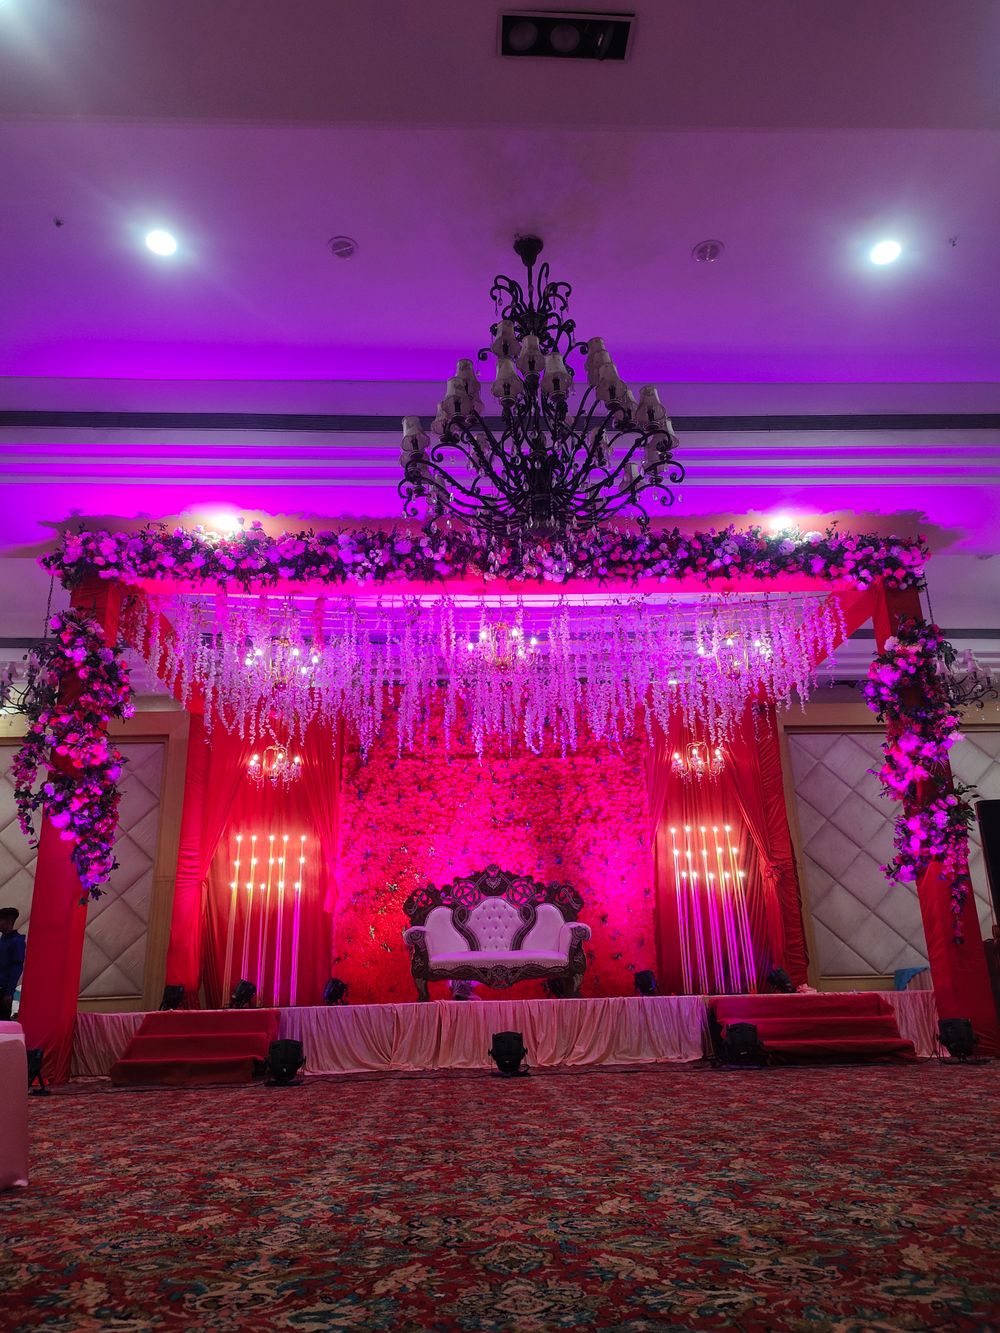 Photo By Freon Events - Decorators